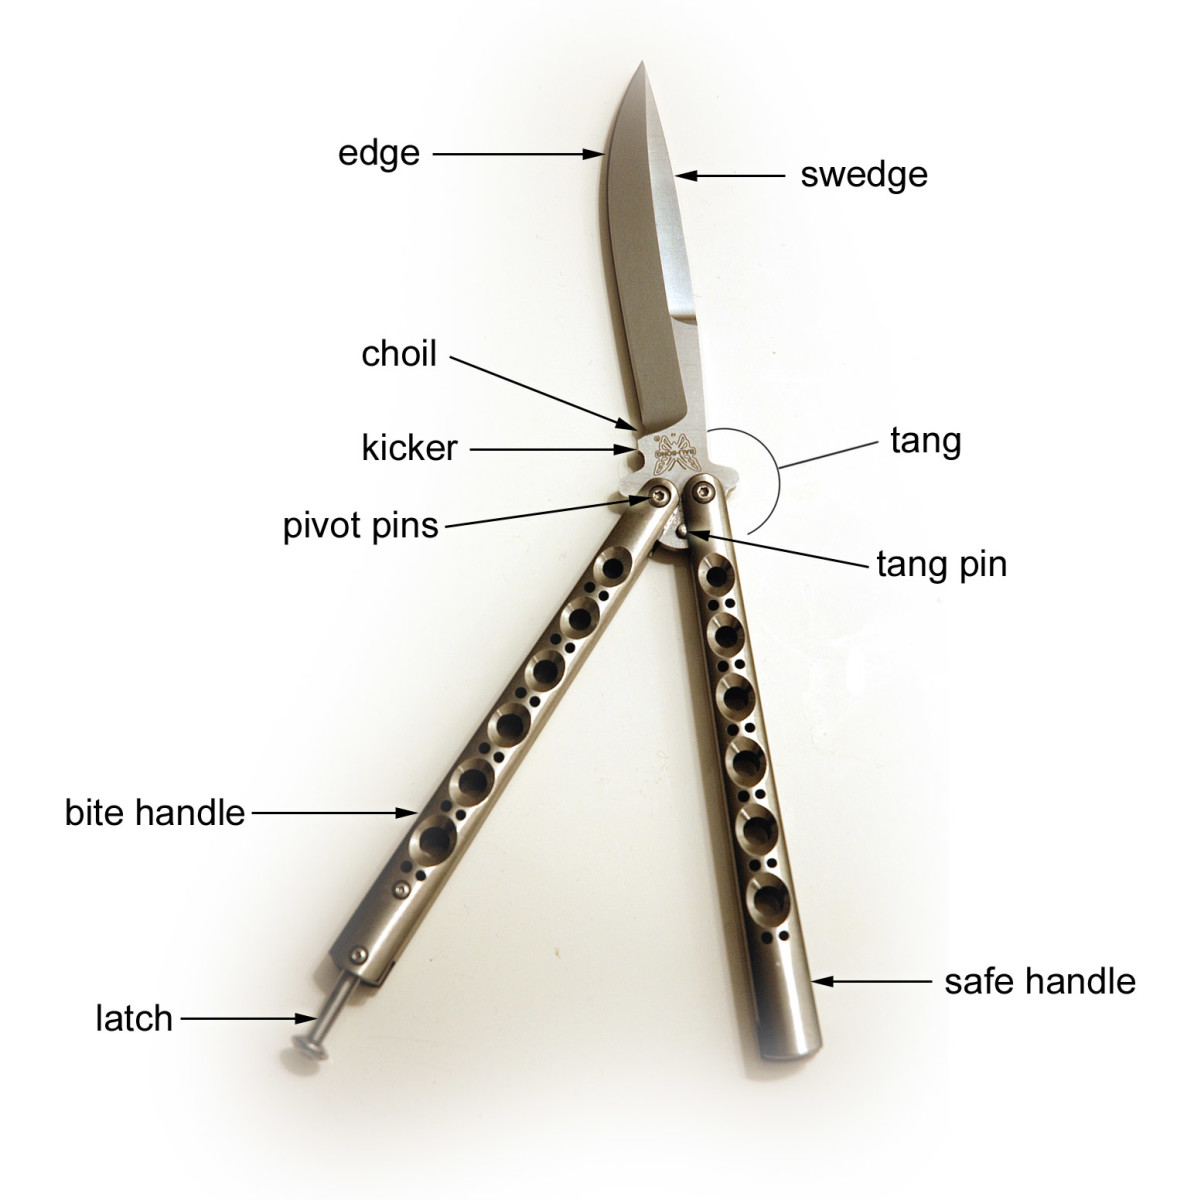 At the bottom left you will see The Latch; it is attached to the Bite Handle, which is the handle on the sharp Edge side of the blade. The handle on the right is the Safe Handle, which is on the non-sharp Swedge part of the blade.